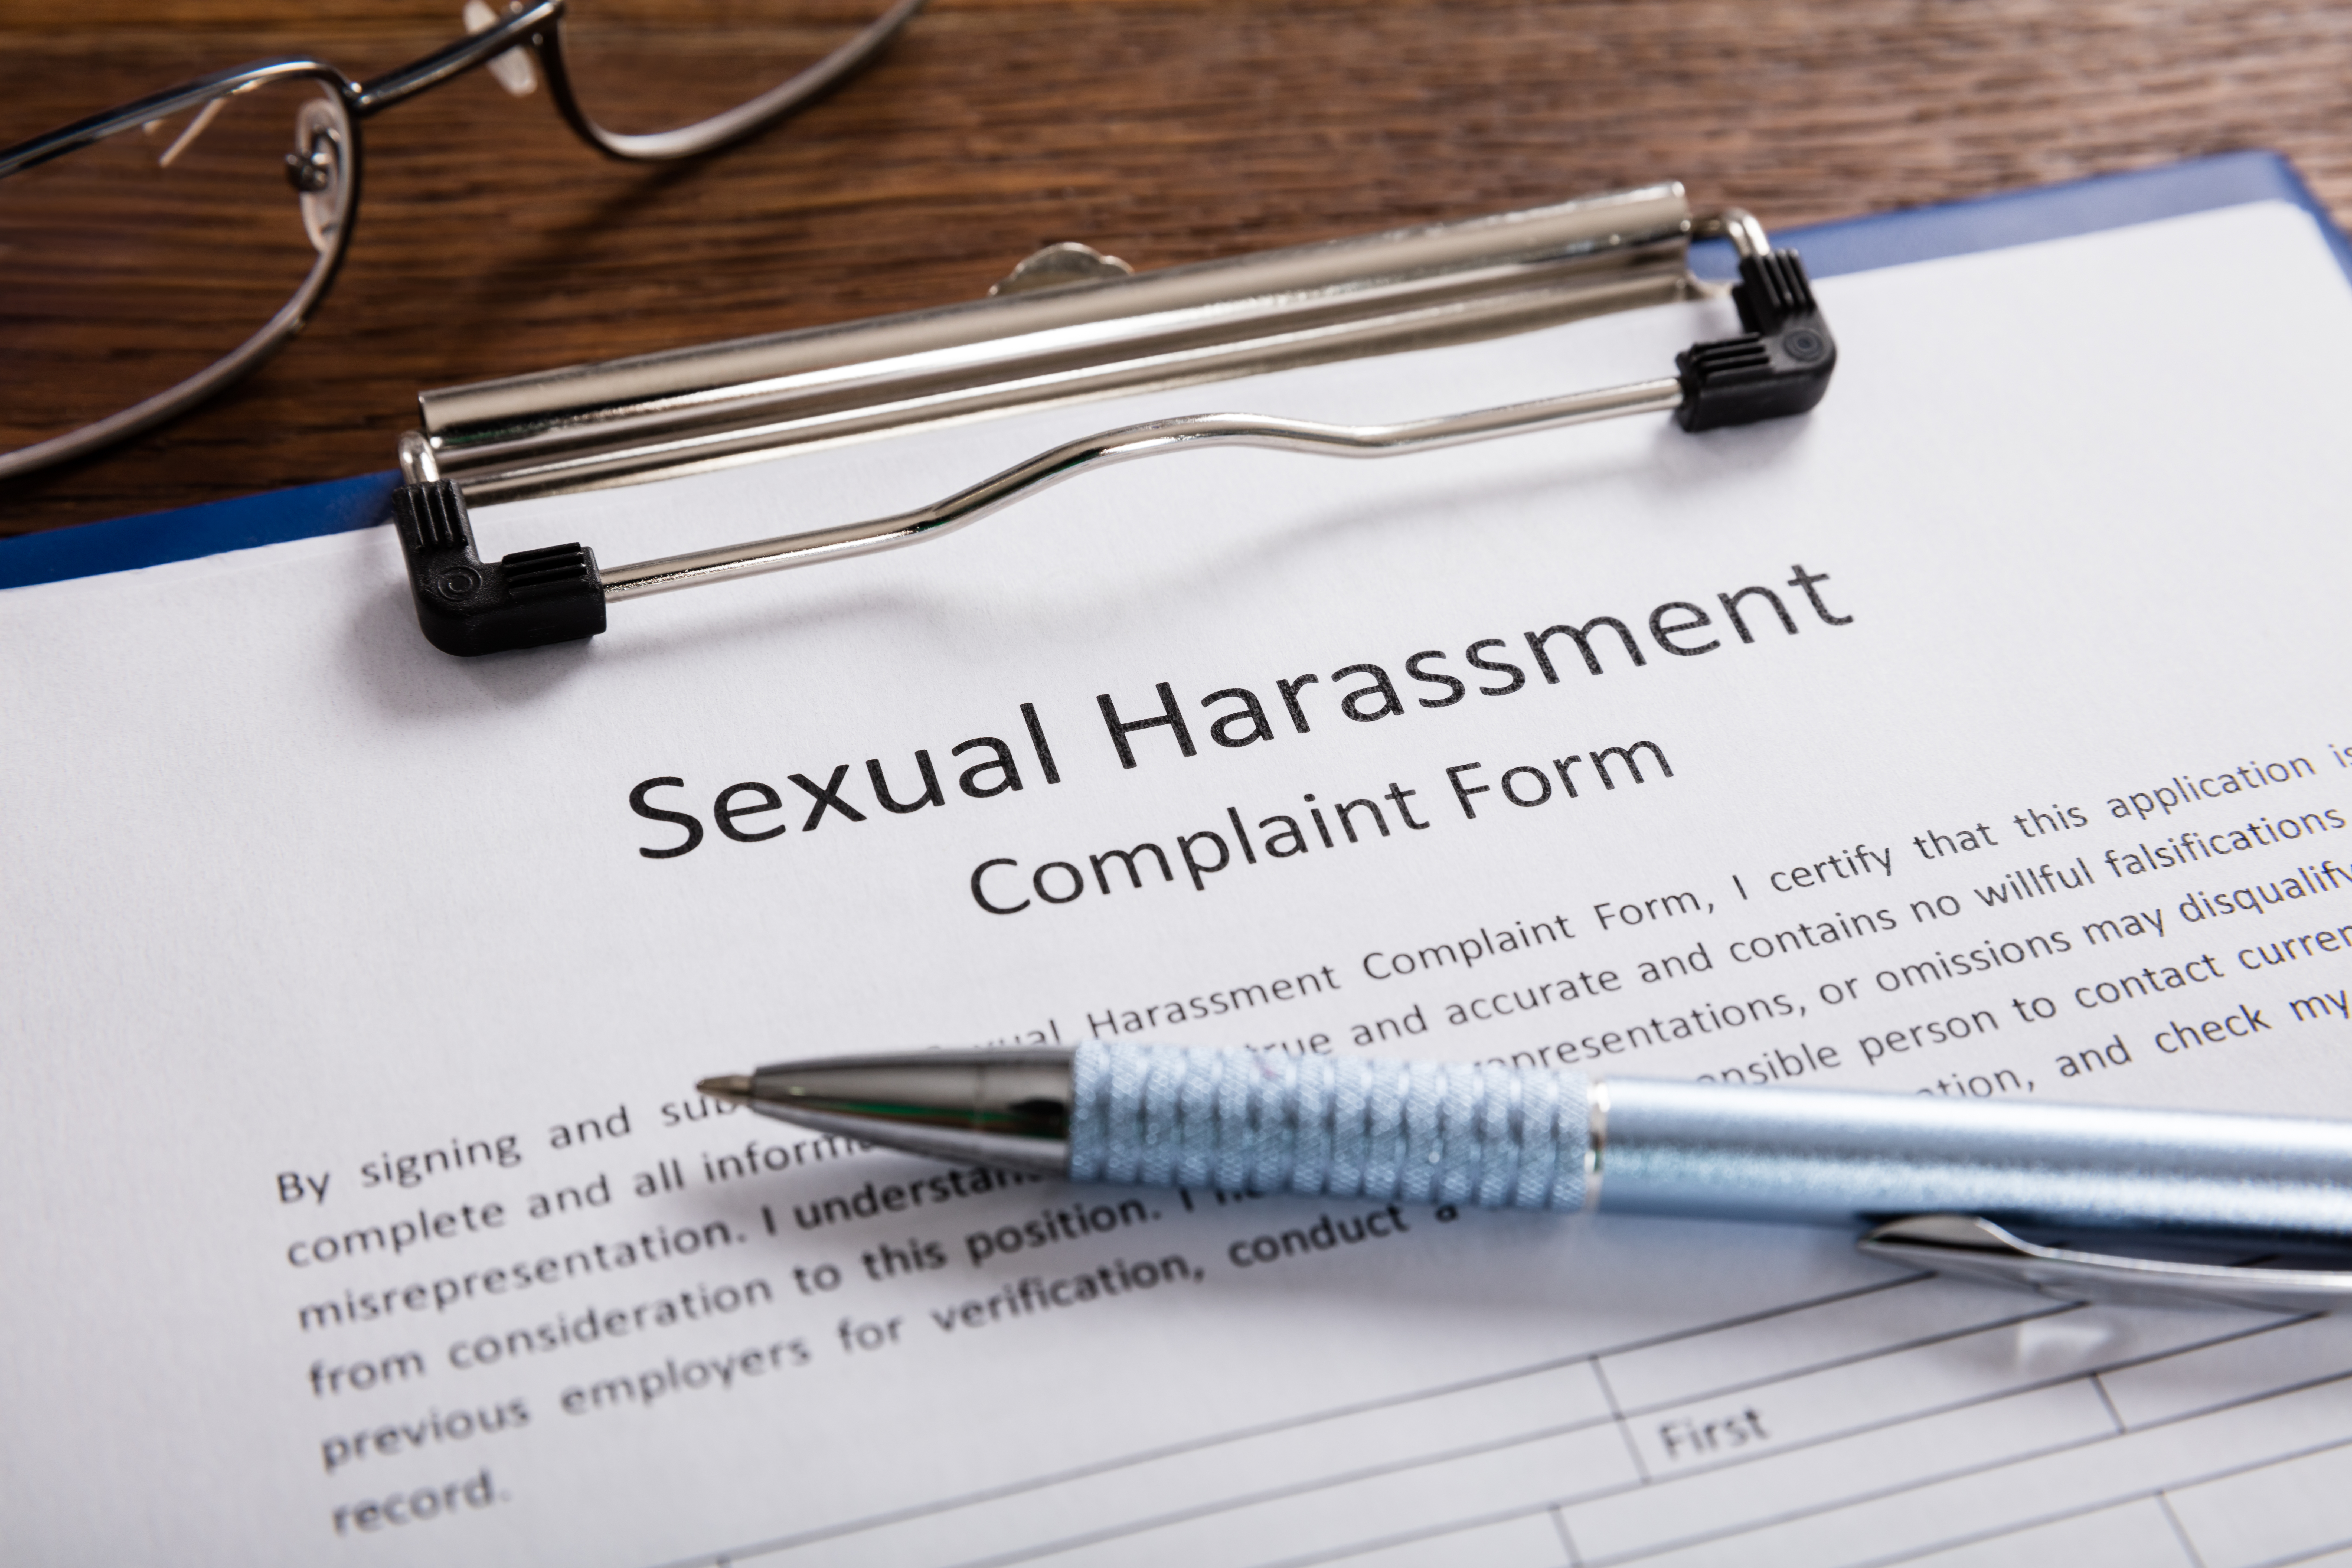 Union turns blind eye to “pervasive” sexual harassment